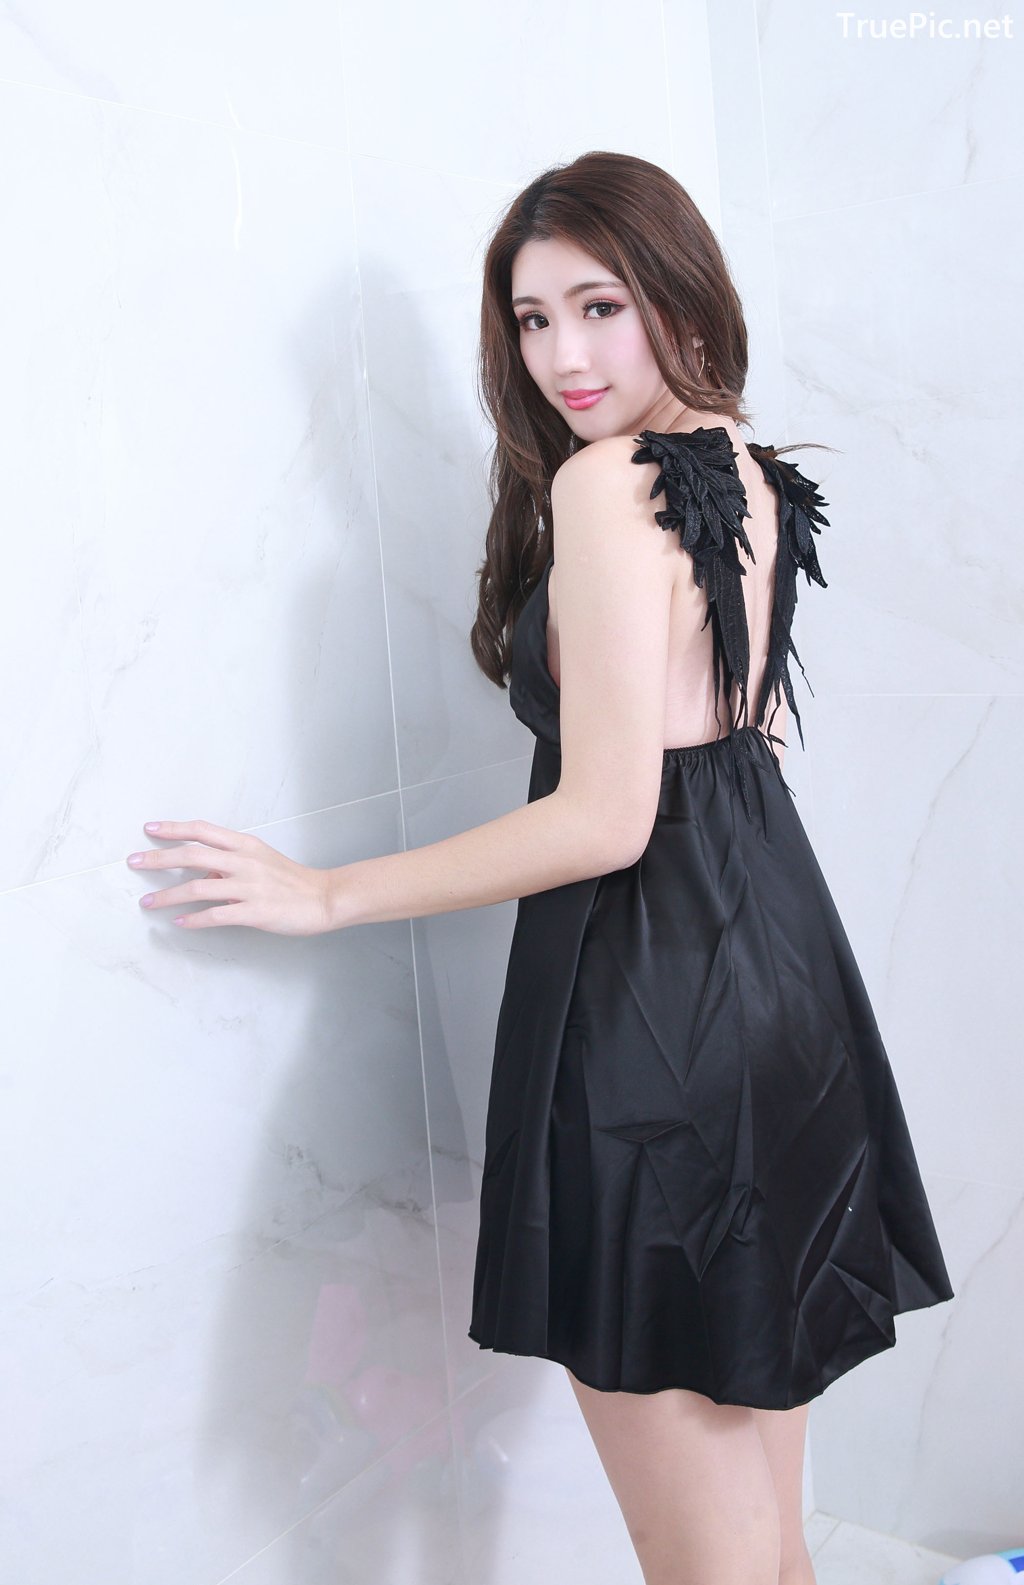 Image-Taiwanese-Model–張倫甄–Charming-Girl-With-Black-Sleep-Dress-TruePic.net- Picture-108